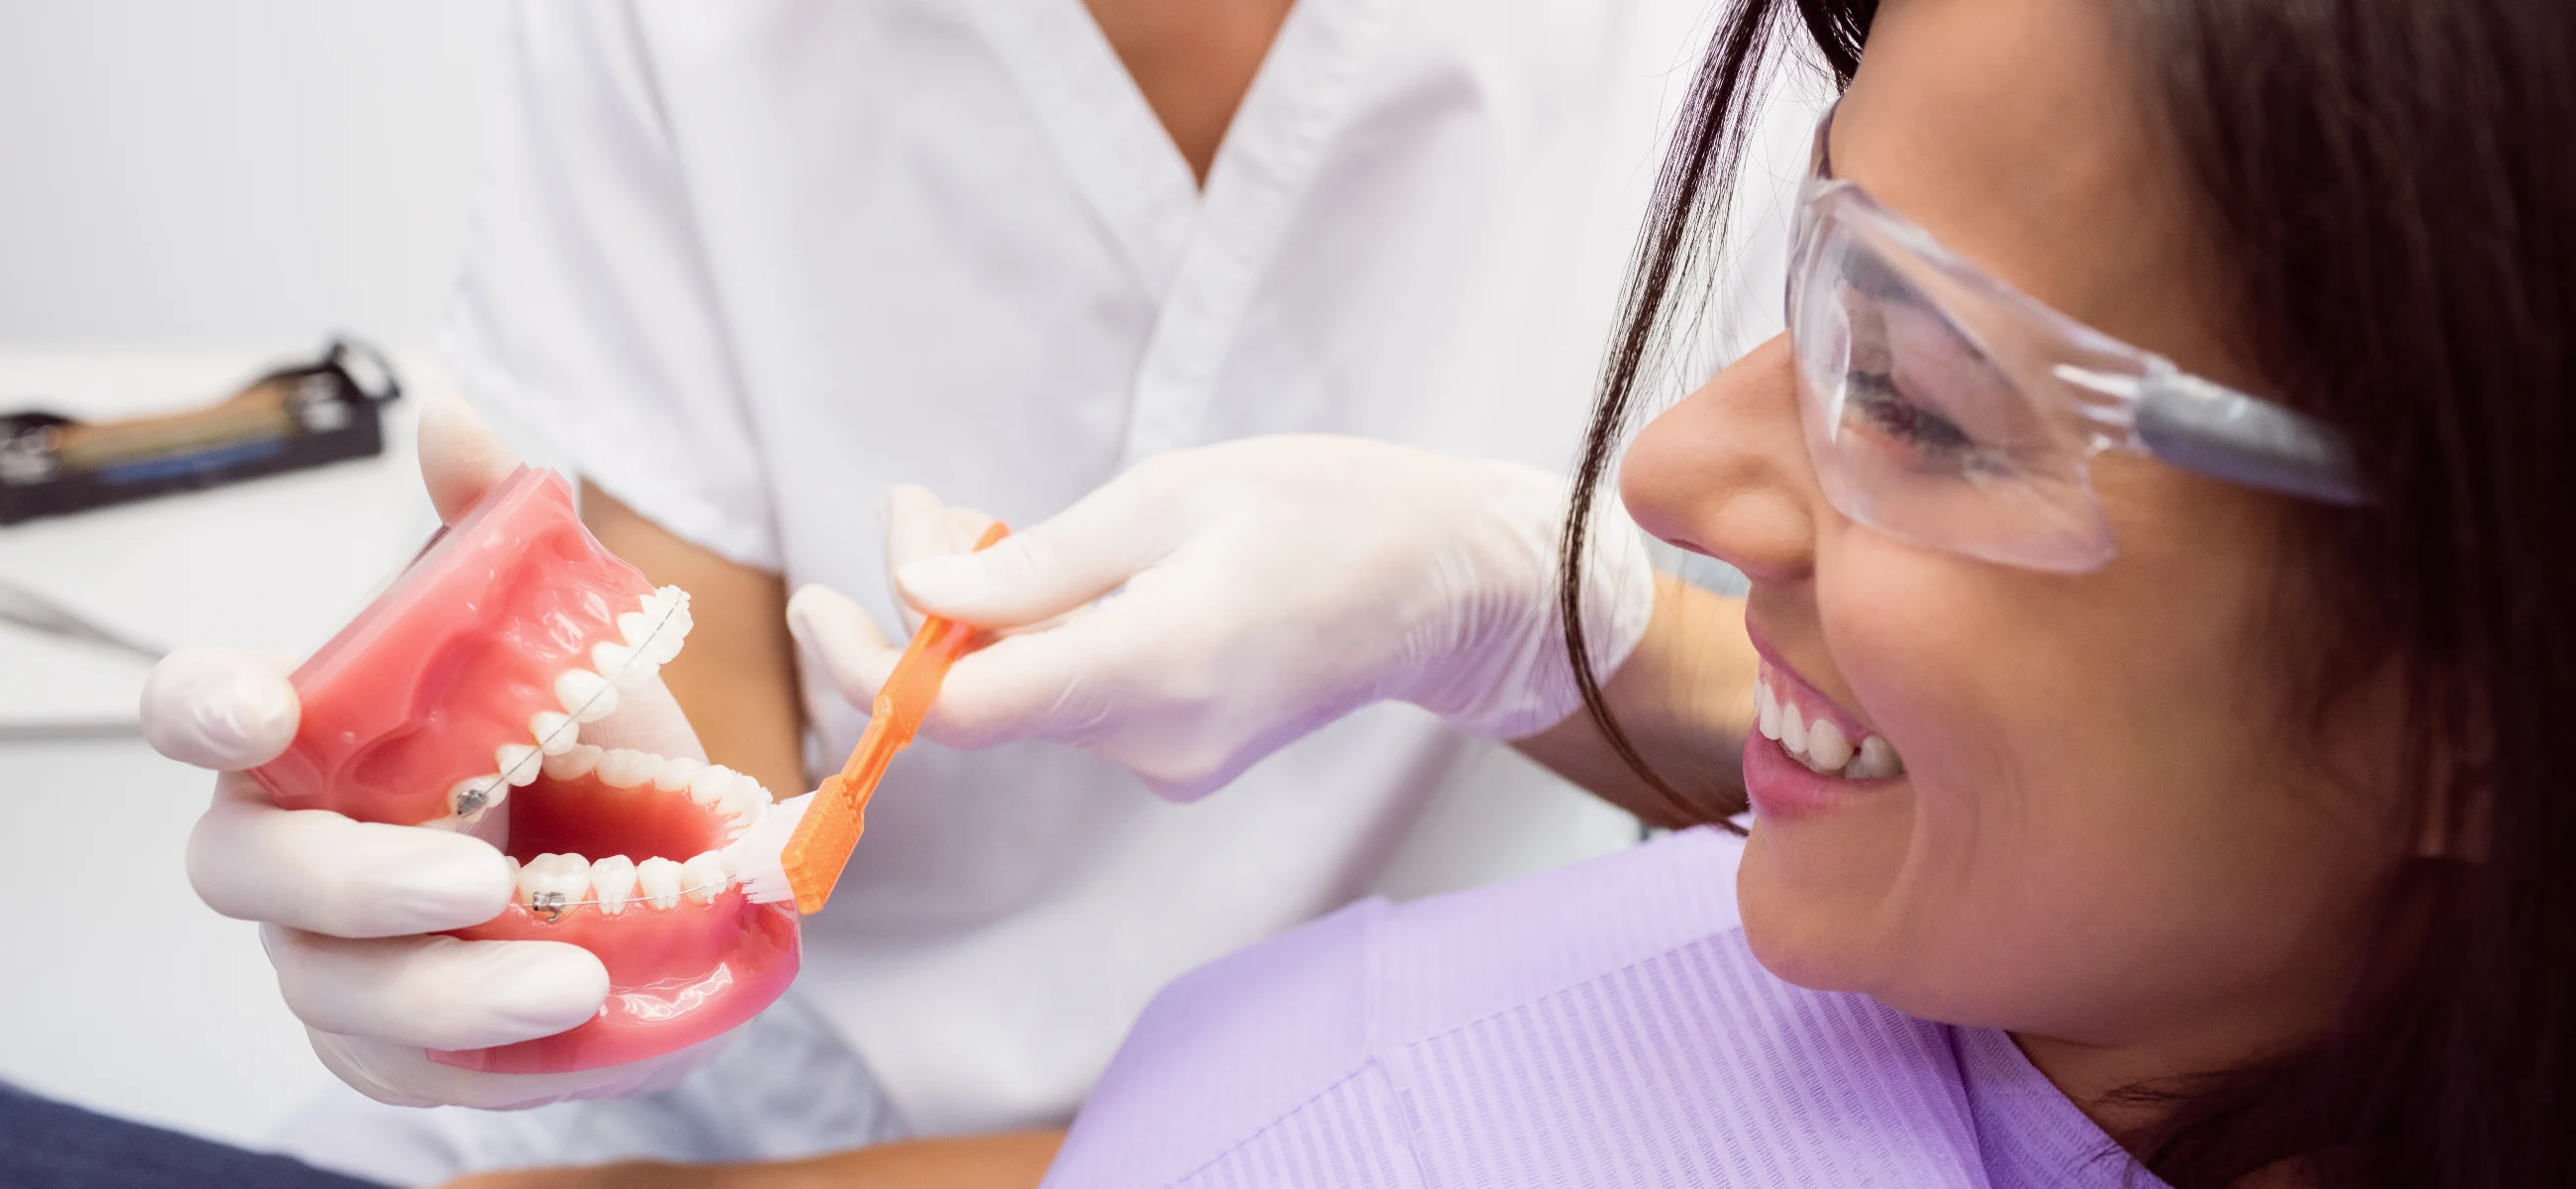 What are dental bridges? Types, process, costs, and more